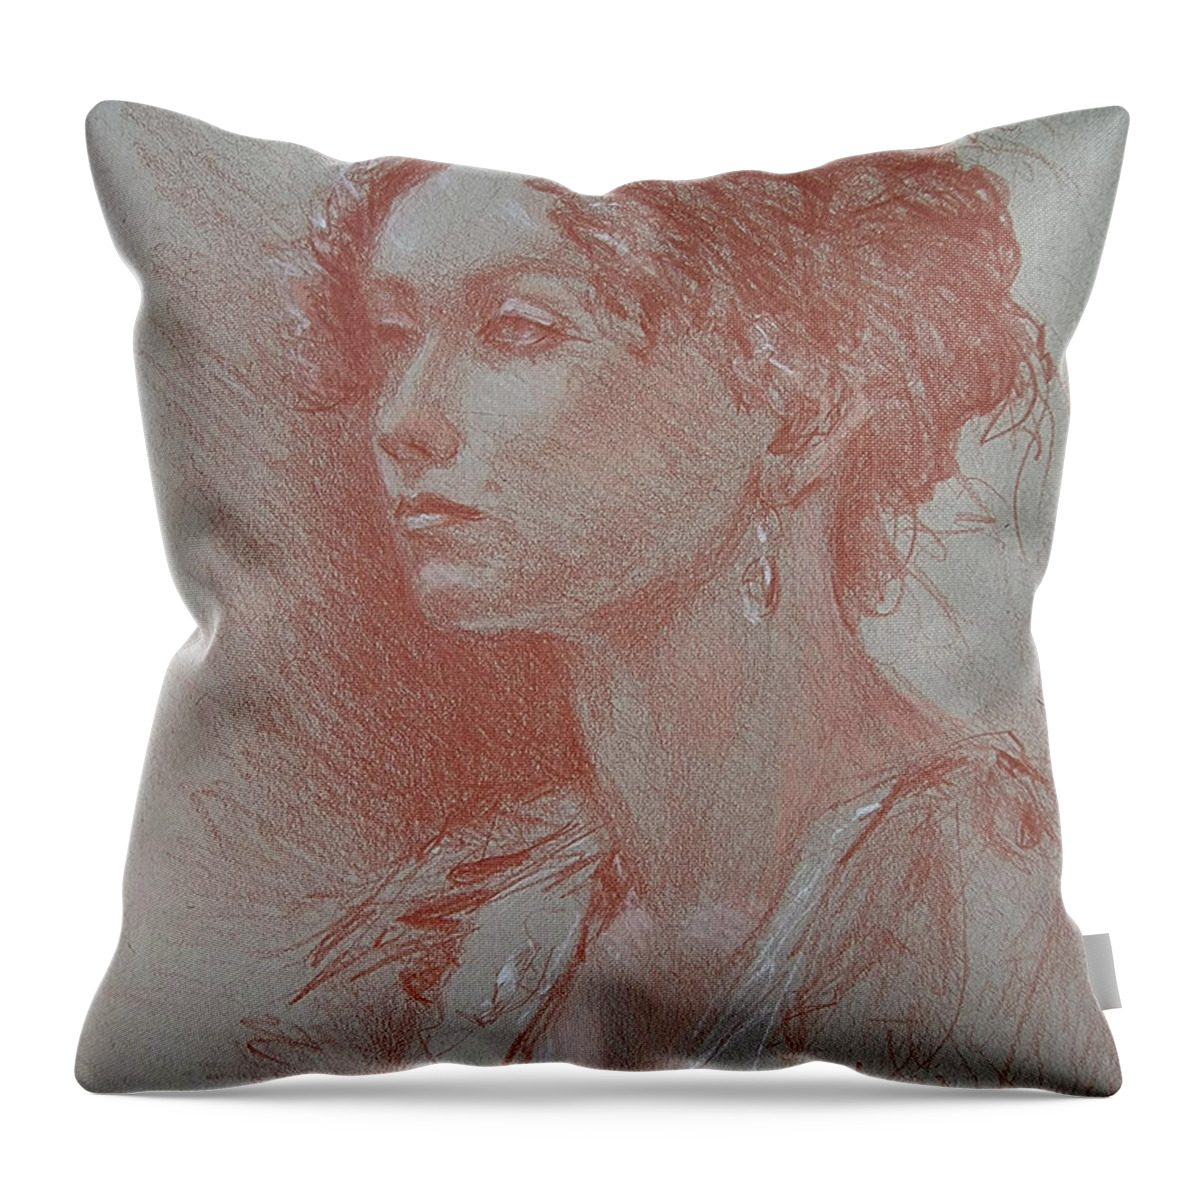 Portrait Throw Pillow featuring the drawing Portrait from life by James Andrews